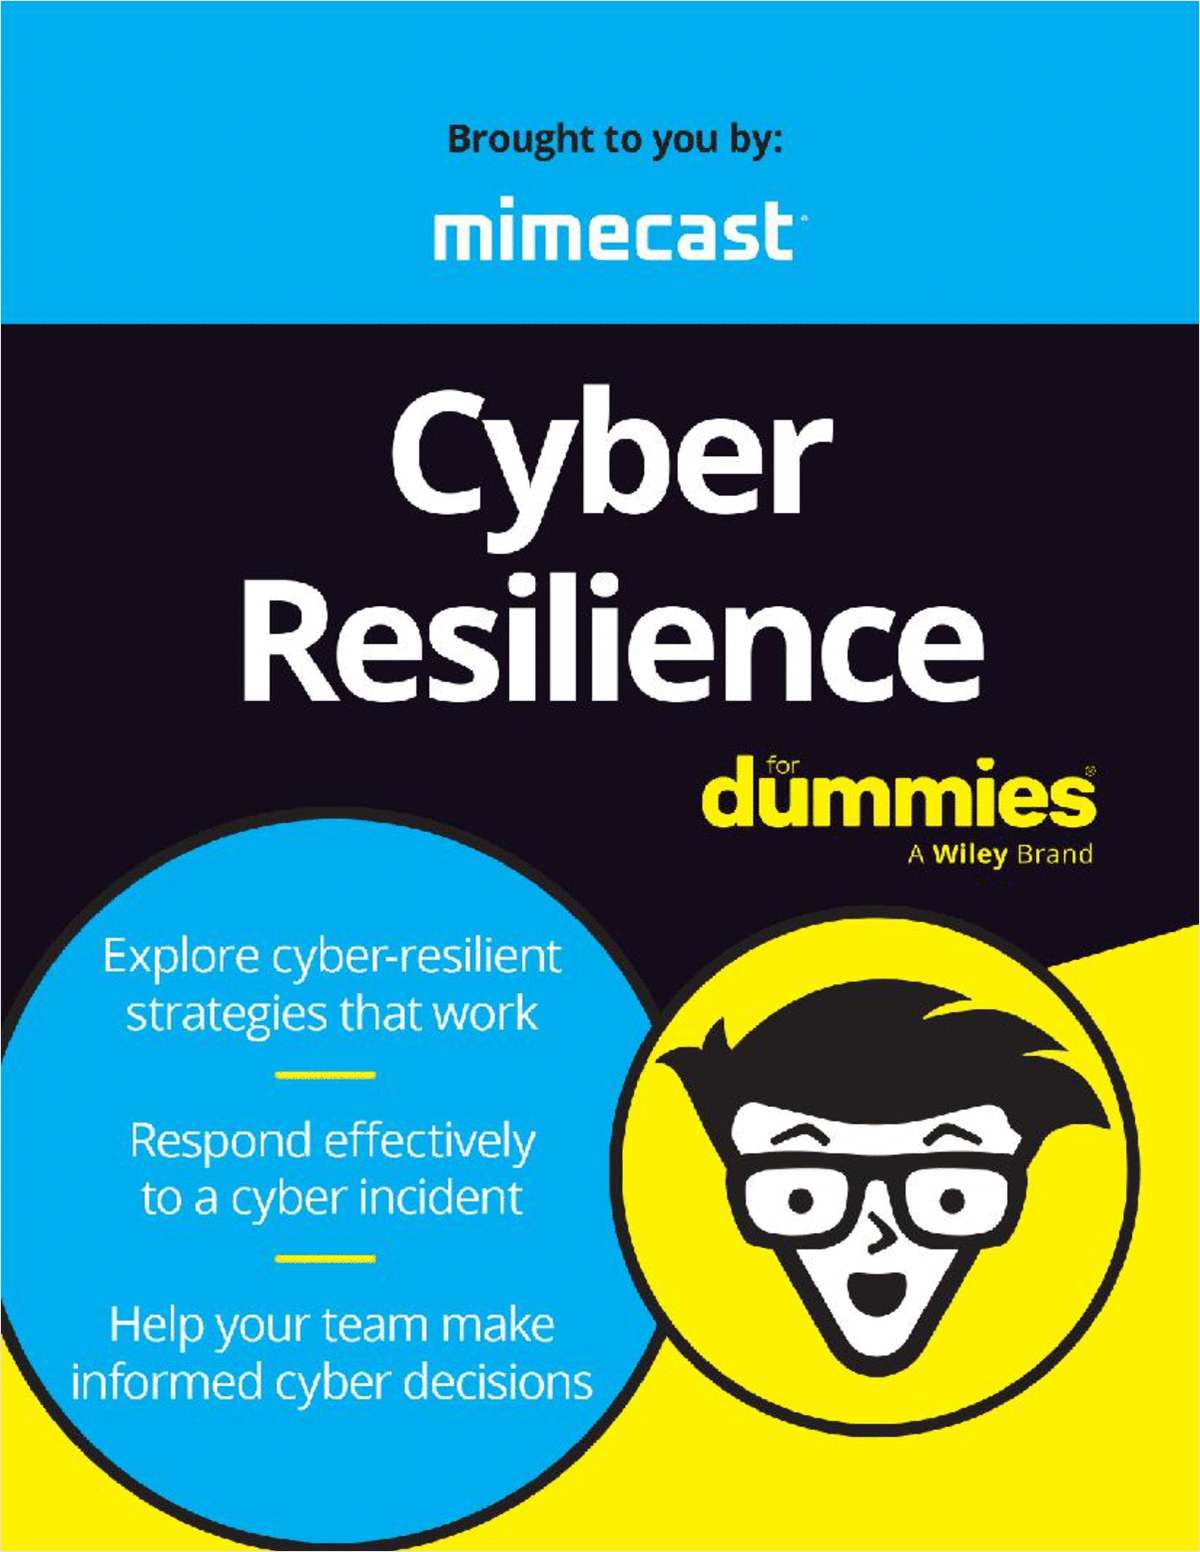 Cyber Resilience for Dummies